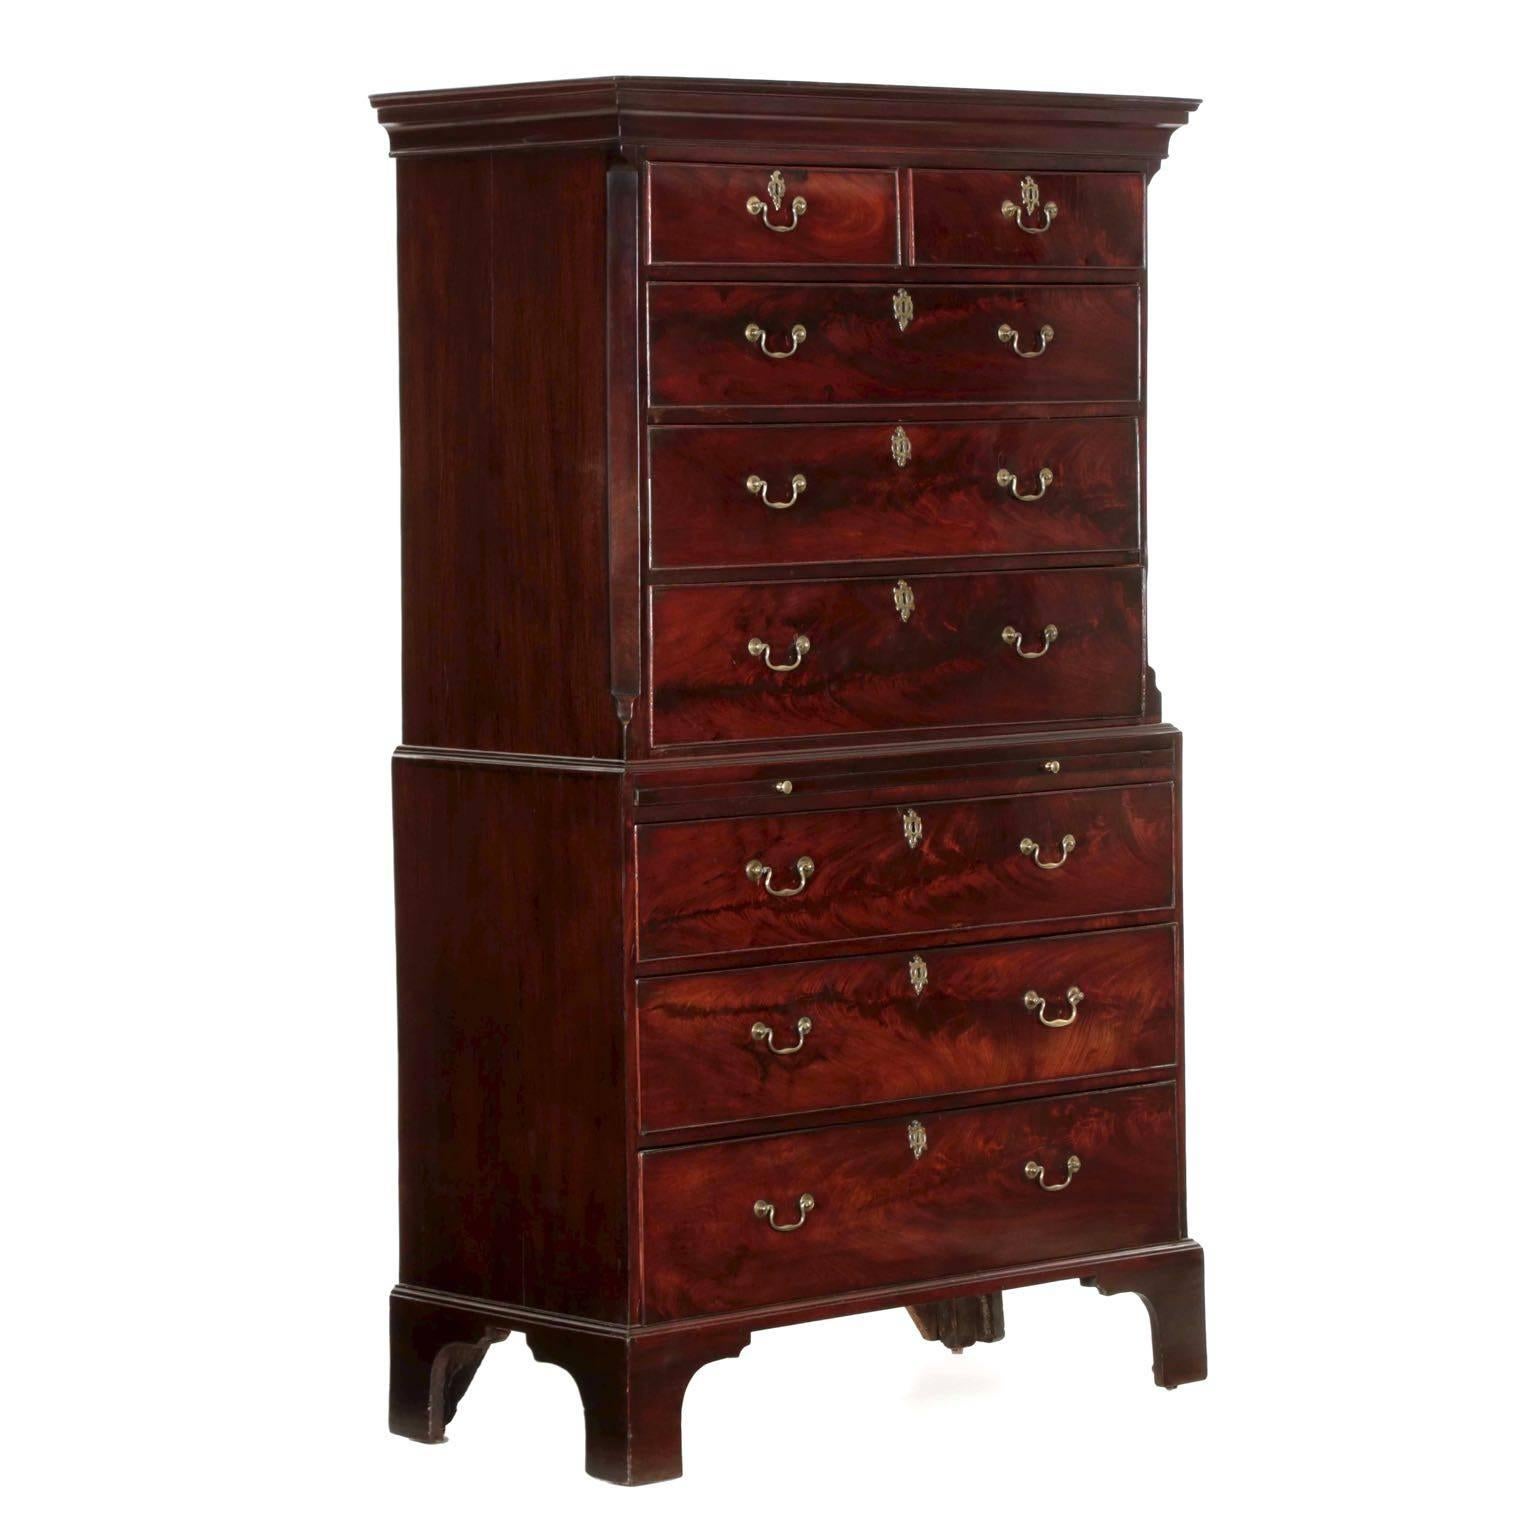 This excellent example of English craftsmanship is noteworthy for its’ use of crotch-grain mahogany throughout the front of the case. The cut is magnificent and shows the eye of an artist, as each veneer was cut to create as much drama as the branch